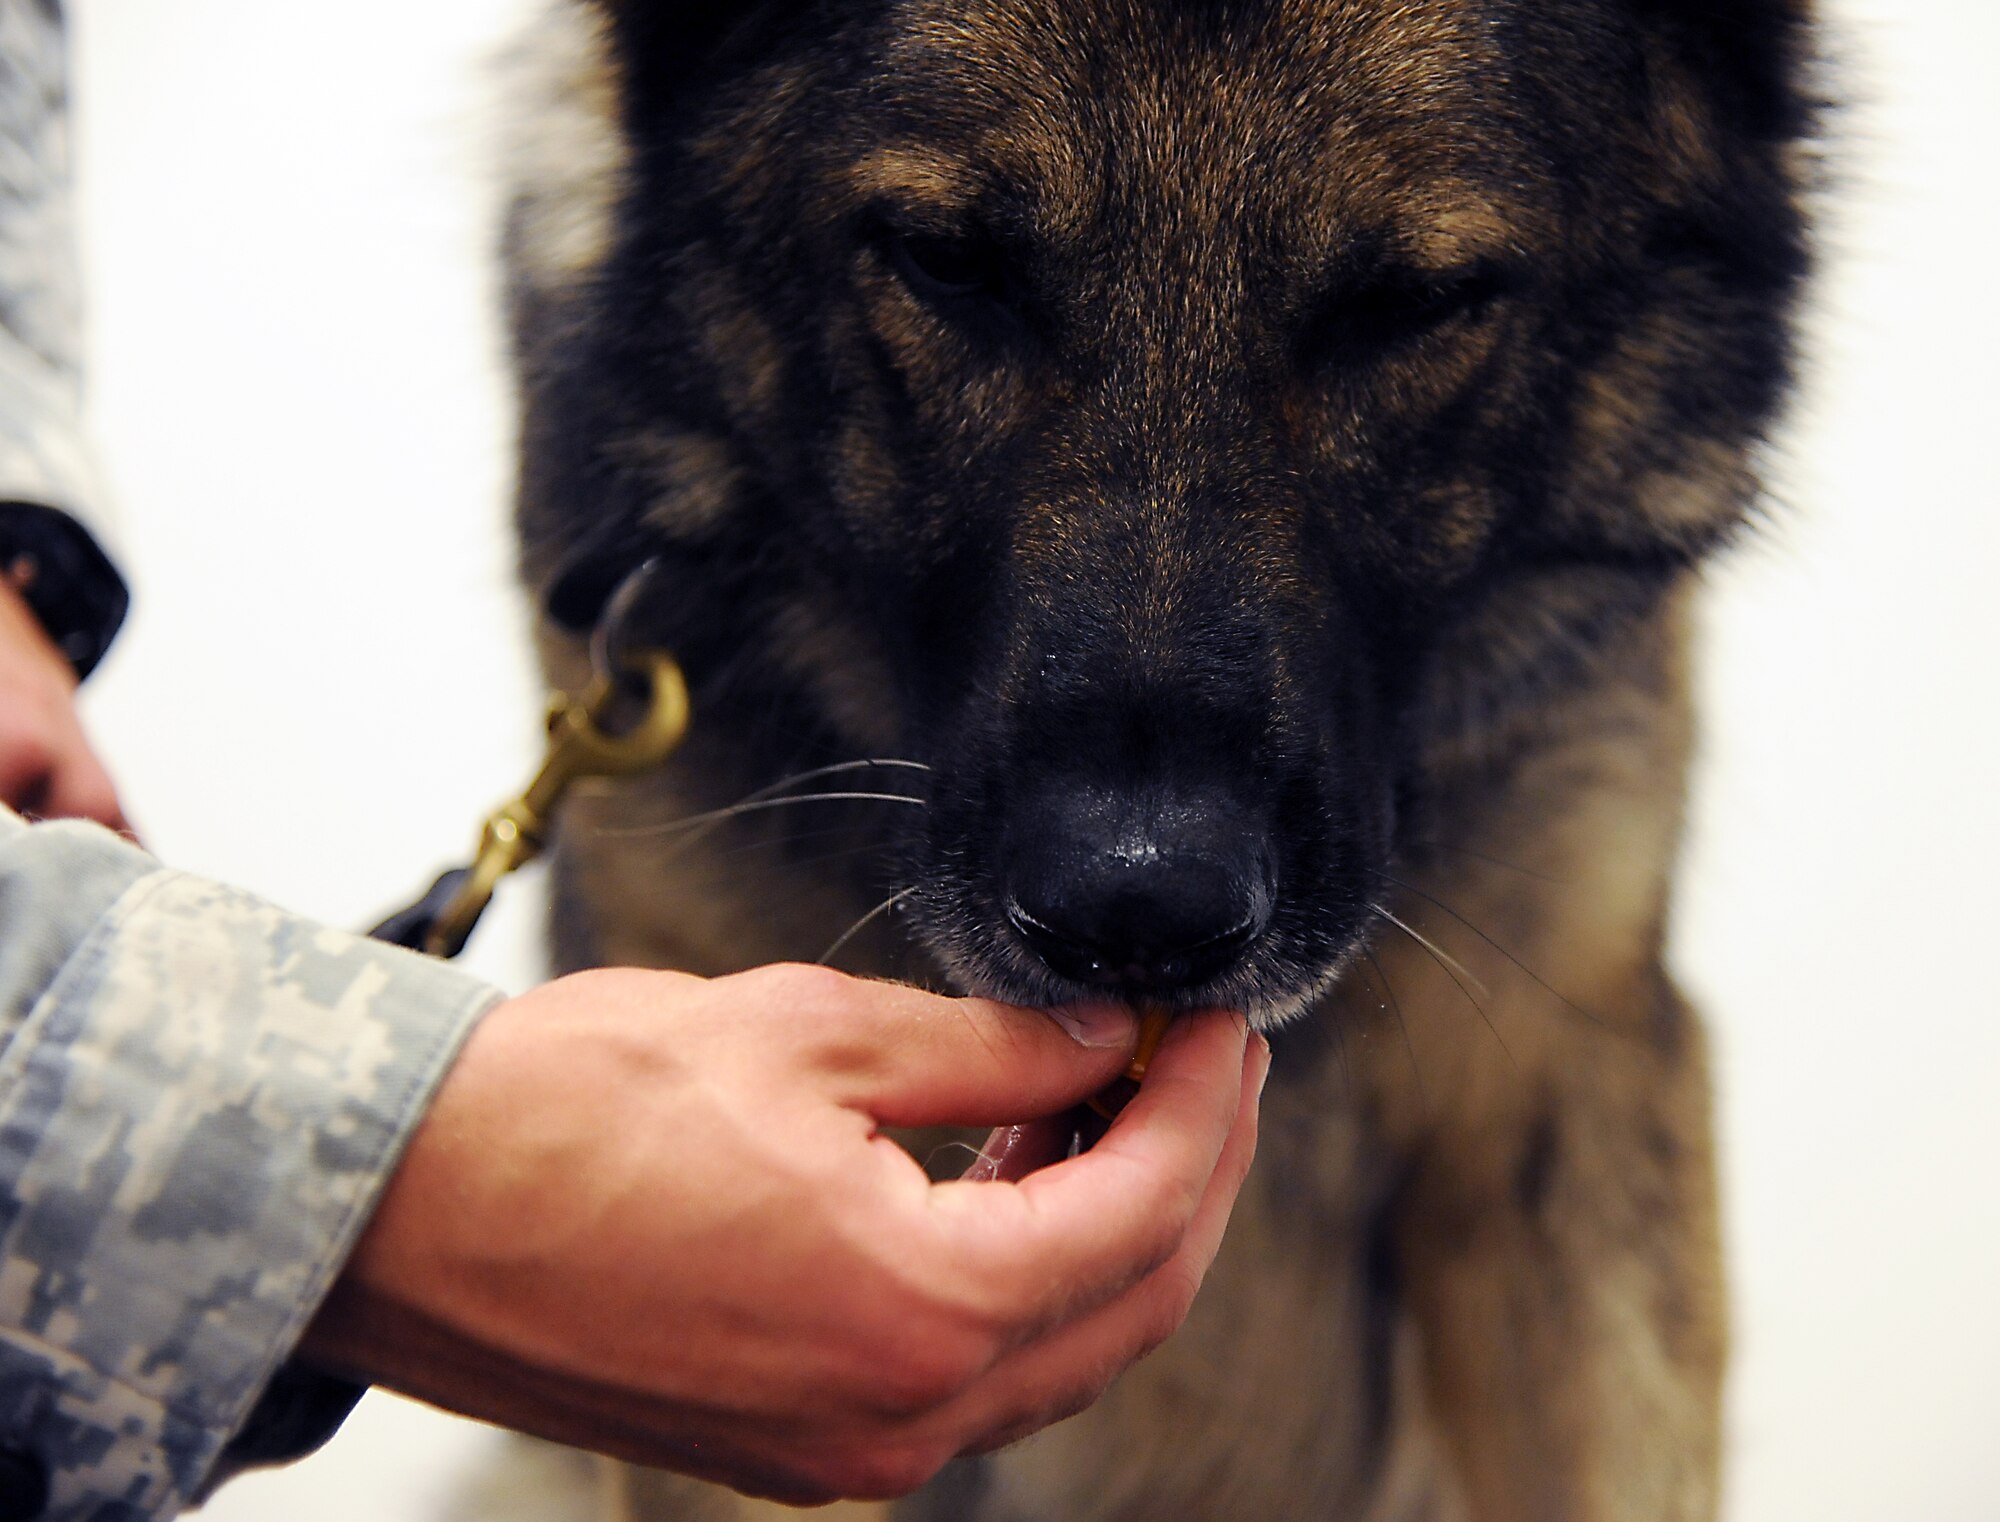 Norbo, a 509th Security Forces Squadron military working dog, eats a treat upon finishing his routine checkup at Whiteman Air Force Base, Mo., July 3, 2013. Norbo suffers from allergies and receives his daily medication from his handler. (U.S. Air Force photo by Airman 1st Class Shelby R. Orozco/Released)